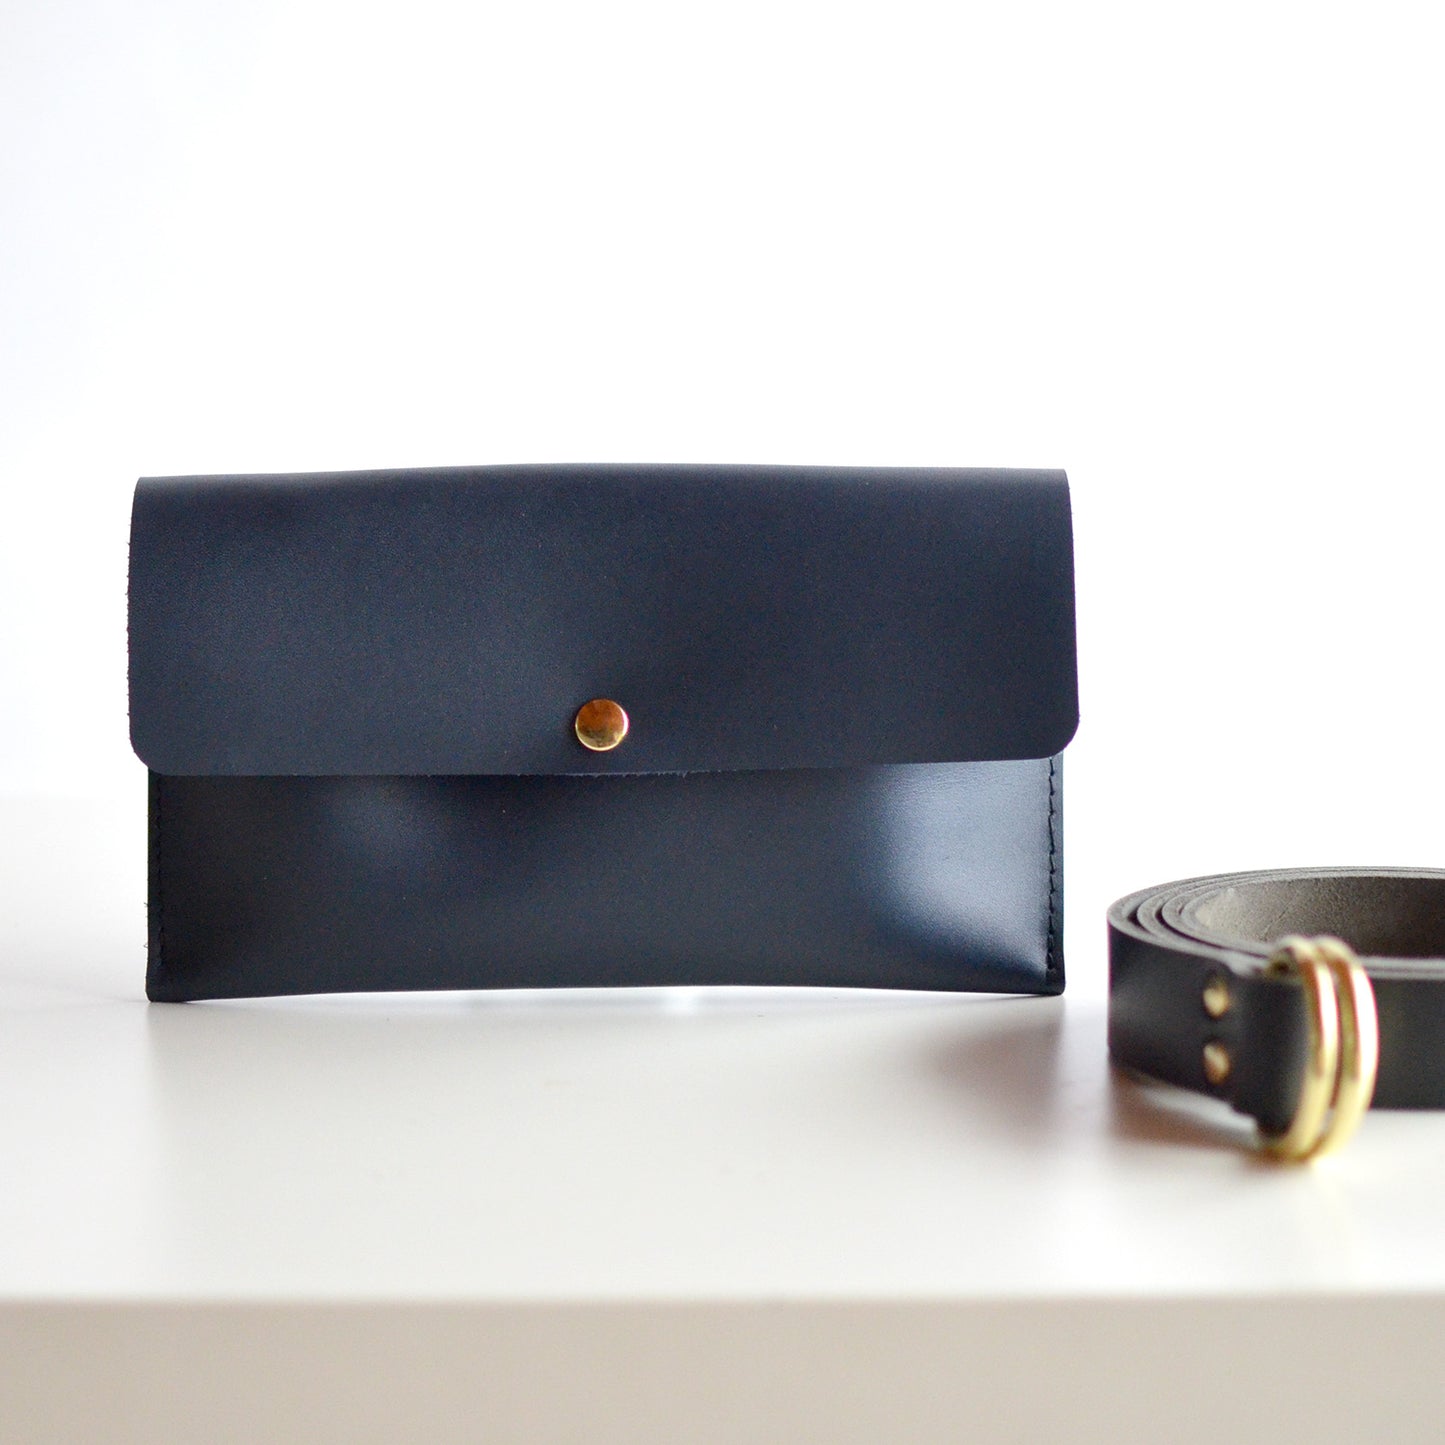 Hipster Bag (Fanny Pack + Clutch) - Navy Blue Leather